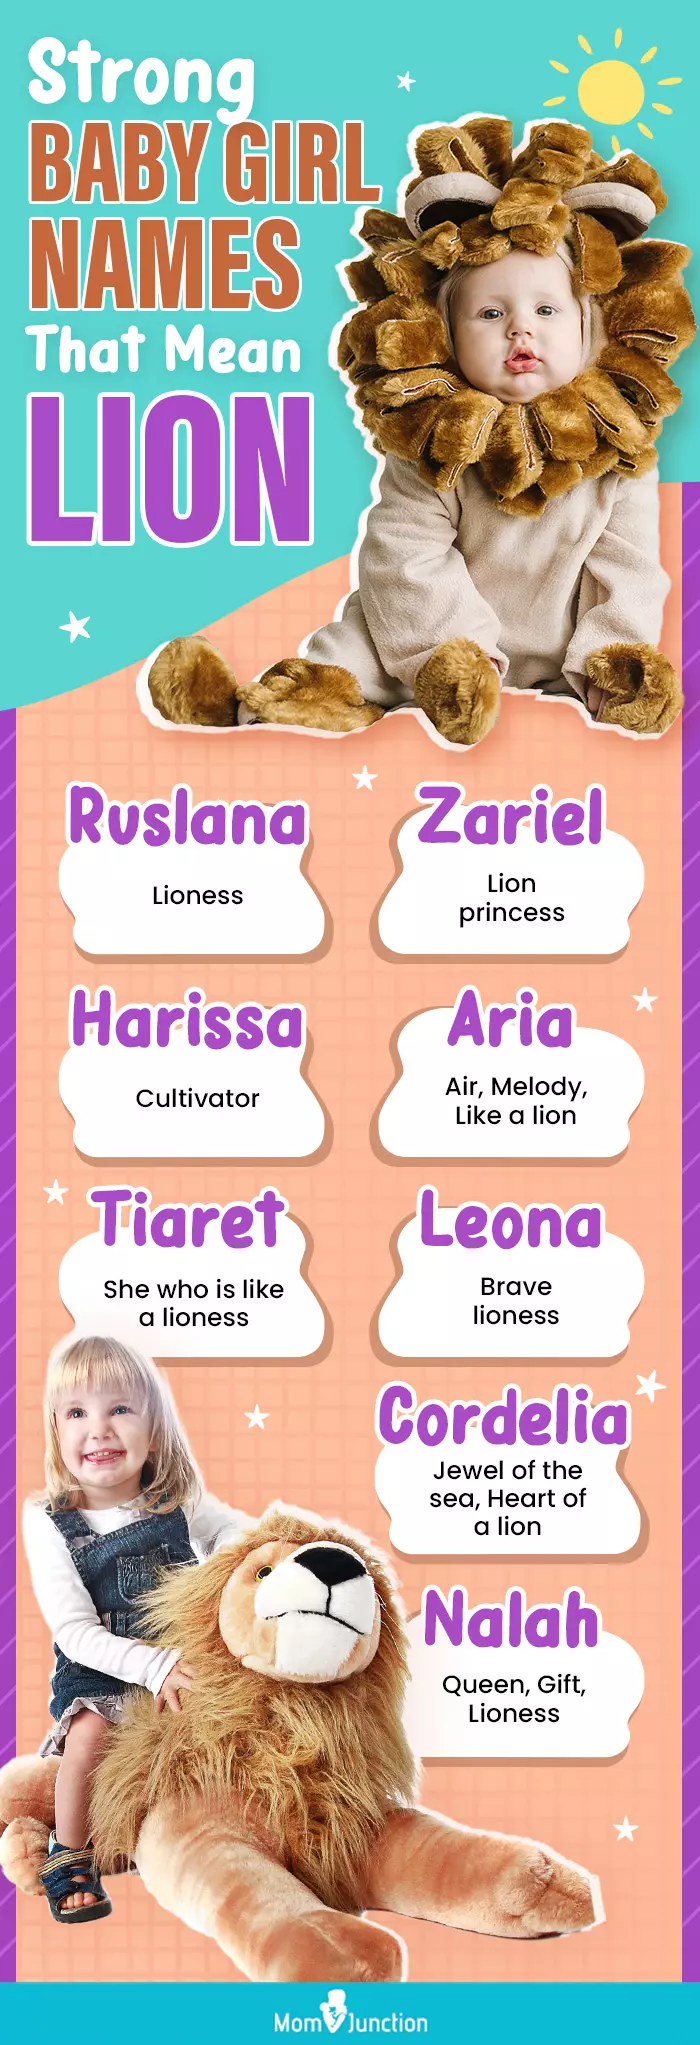 strong baby girl names that mean lion (infographic)